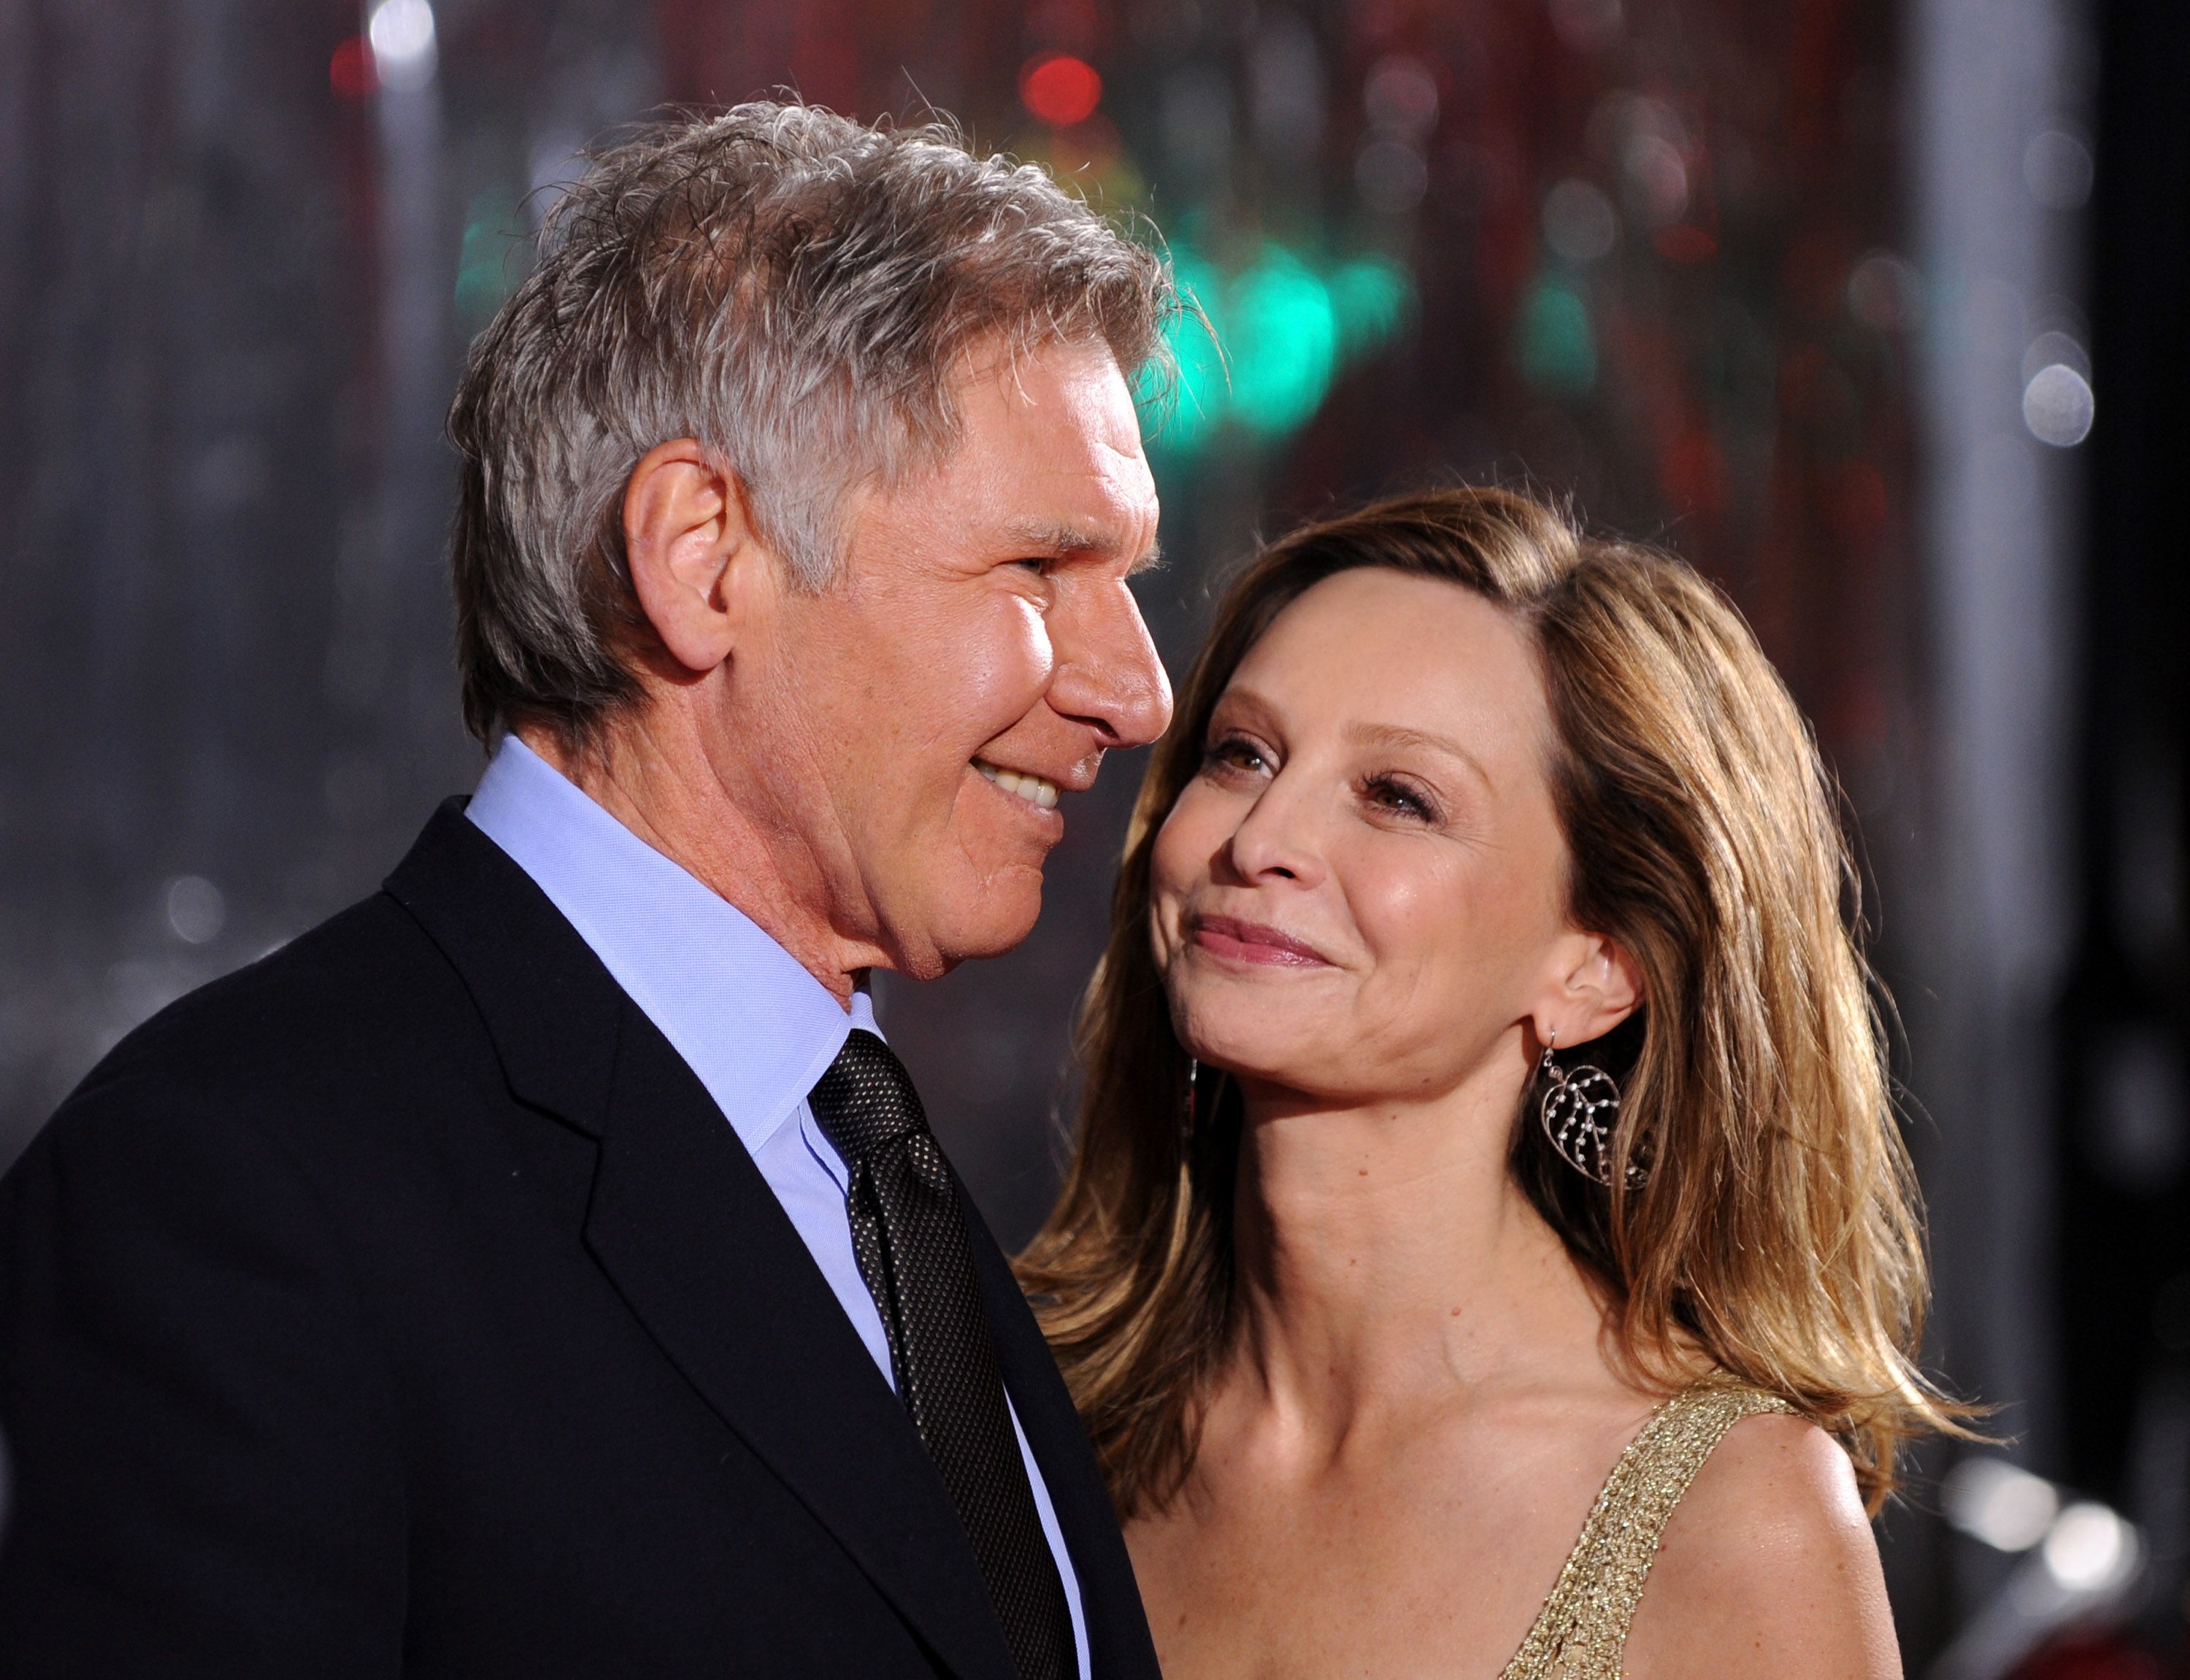 Harrison Ford and Calista Flockhart Relationship Timeline, Love Story